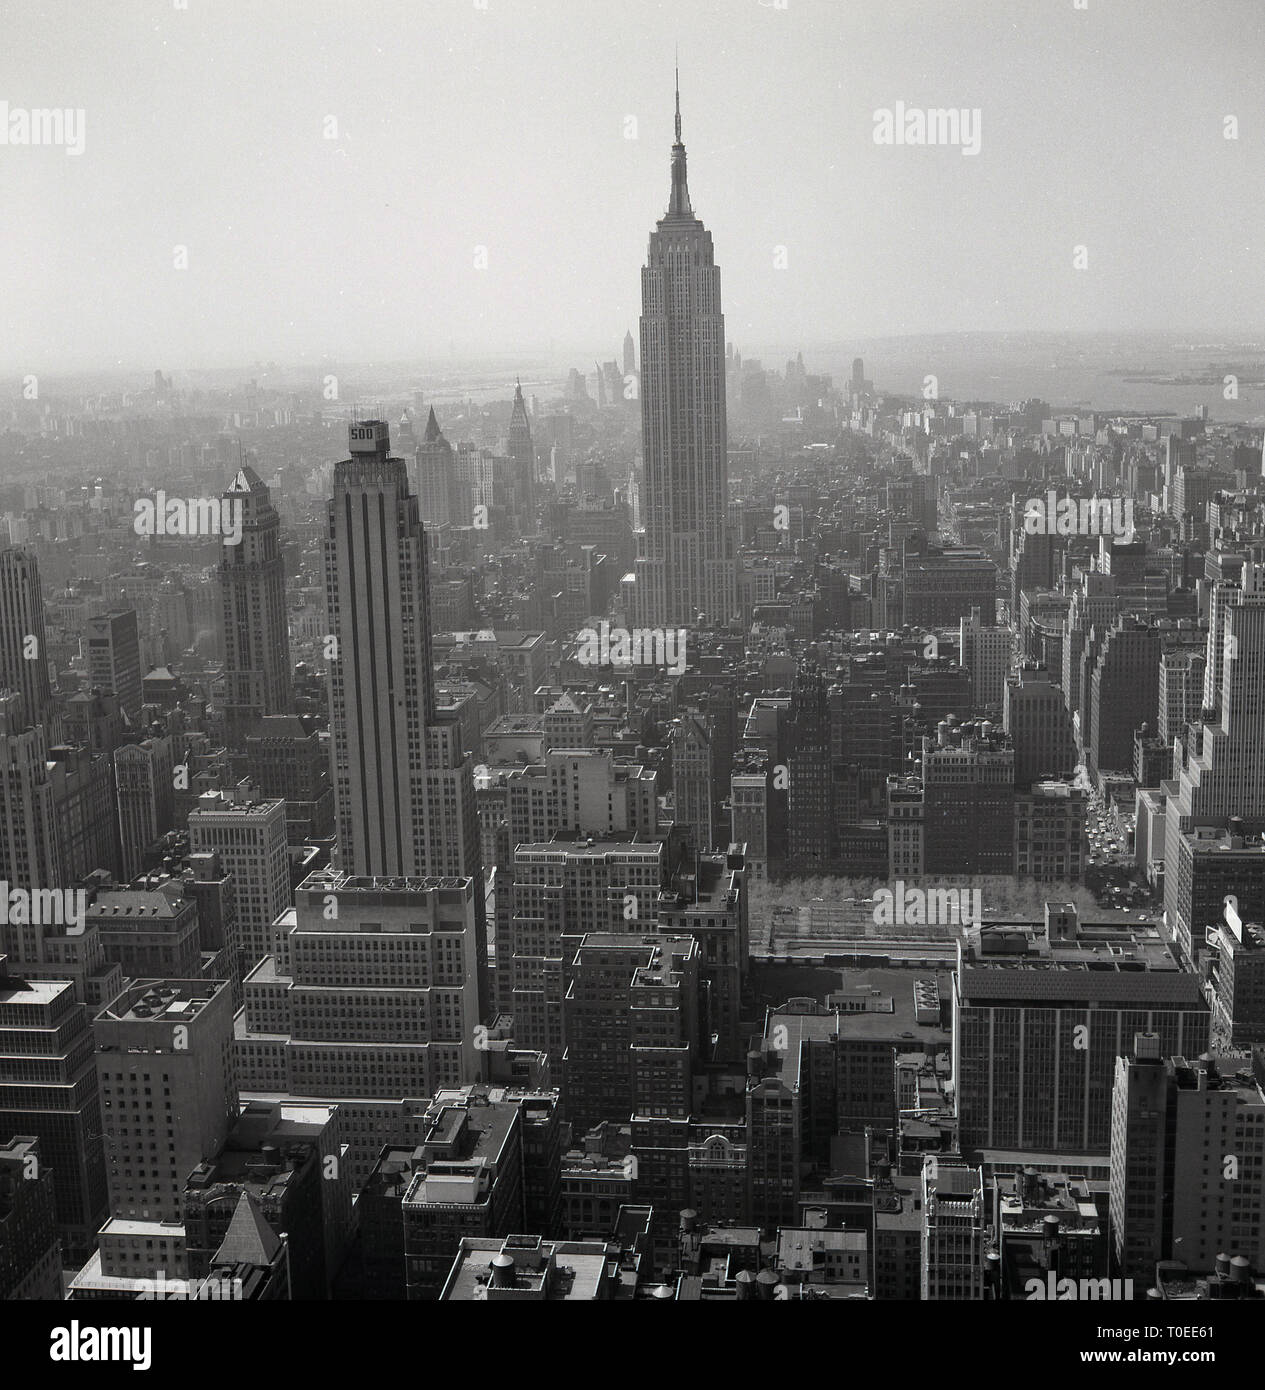 1950s. New York, USA, aerial view over Manhattan and New York city showing skyscrapers and other buildings. Stock Photo